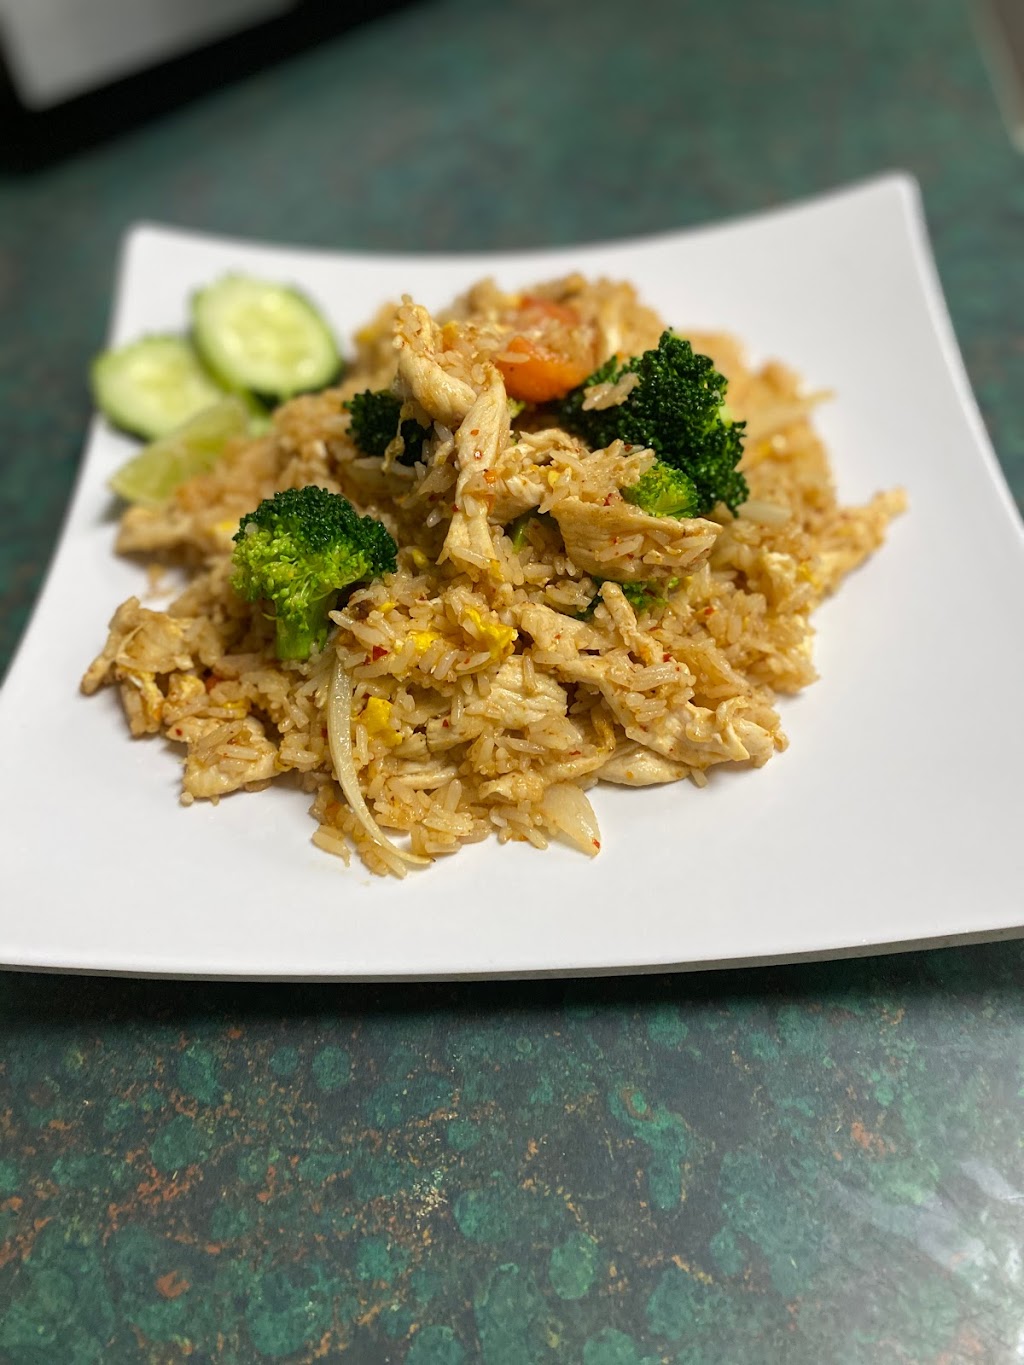 Appethaizing Thai Food Puyallup | 3830 1114 River Rd D, Puyallup, WA 98371, USA | Phone: (253) 435-8681